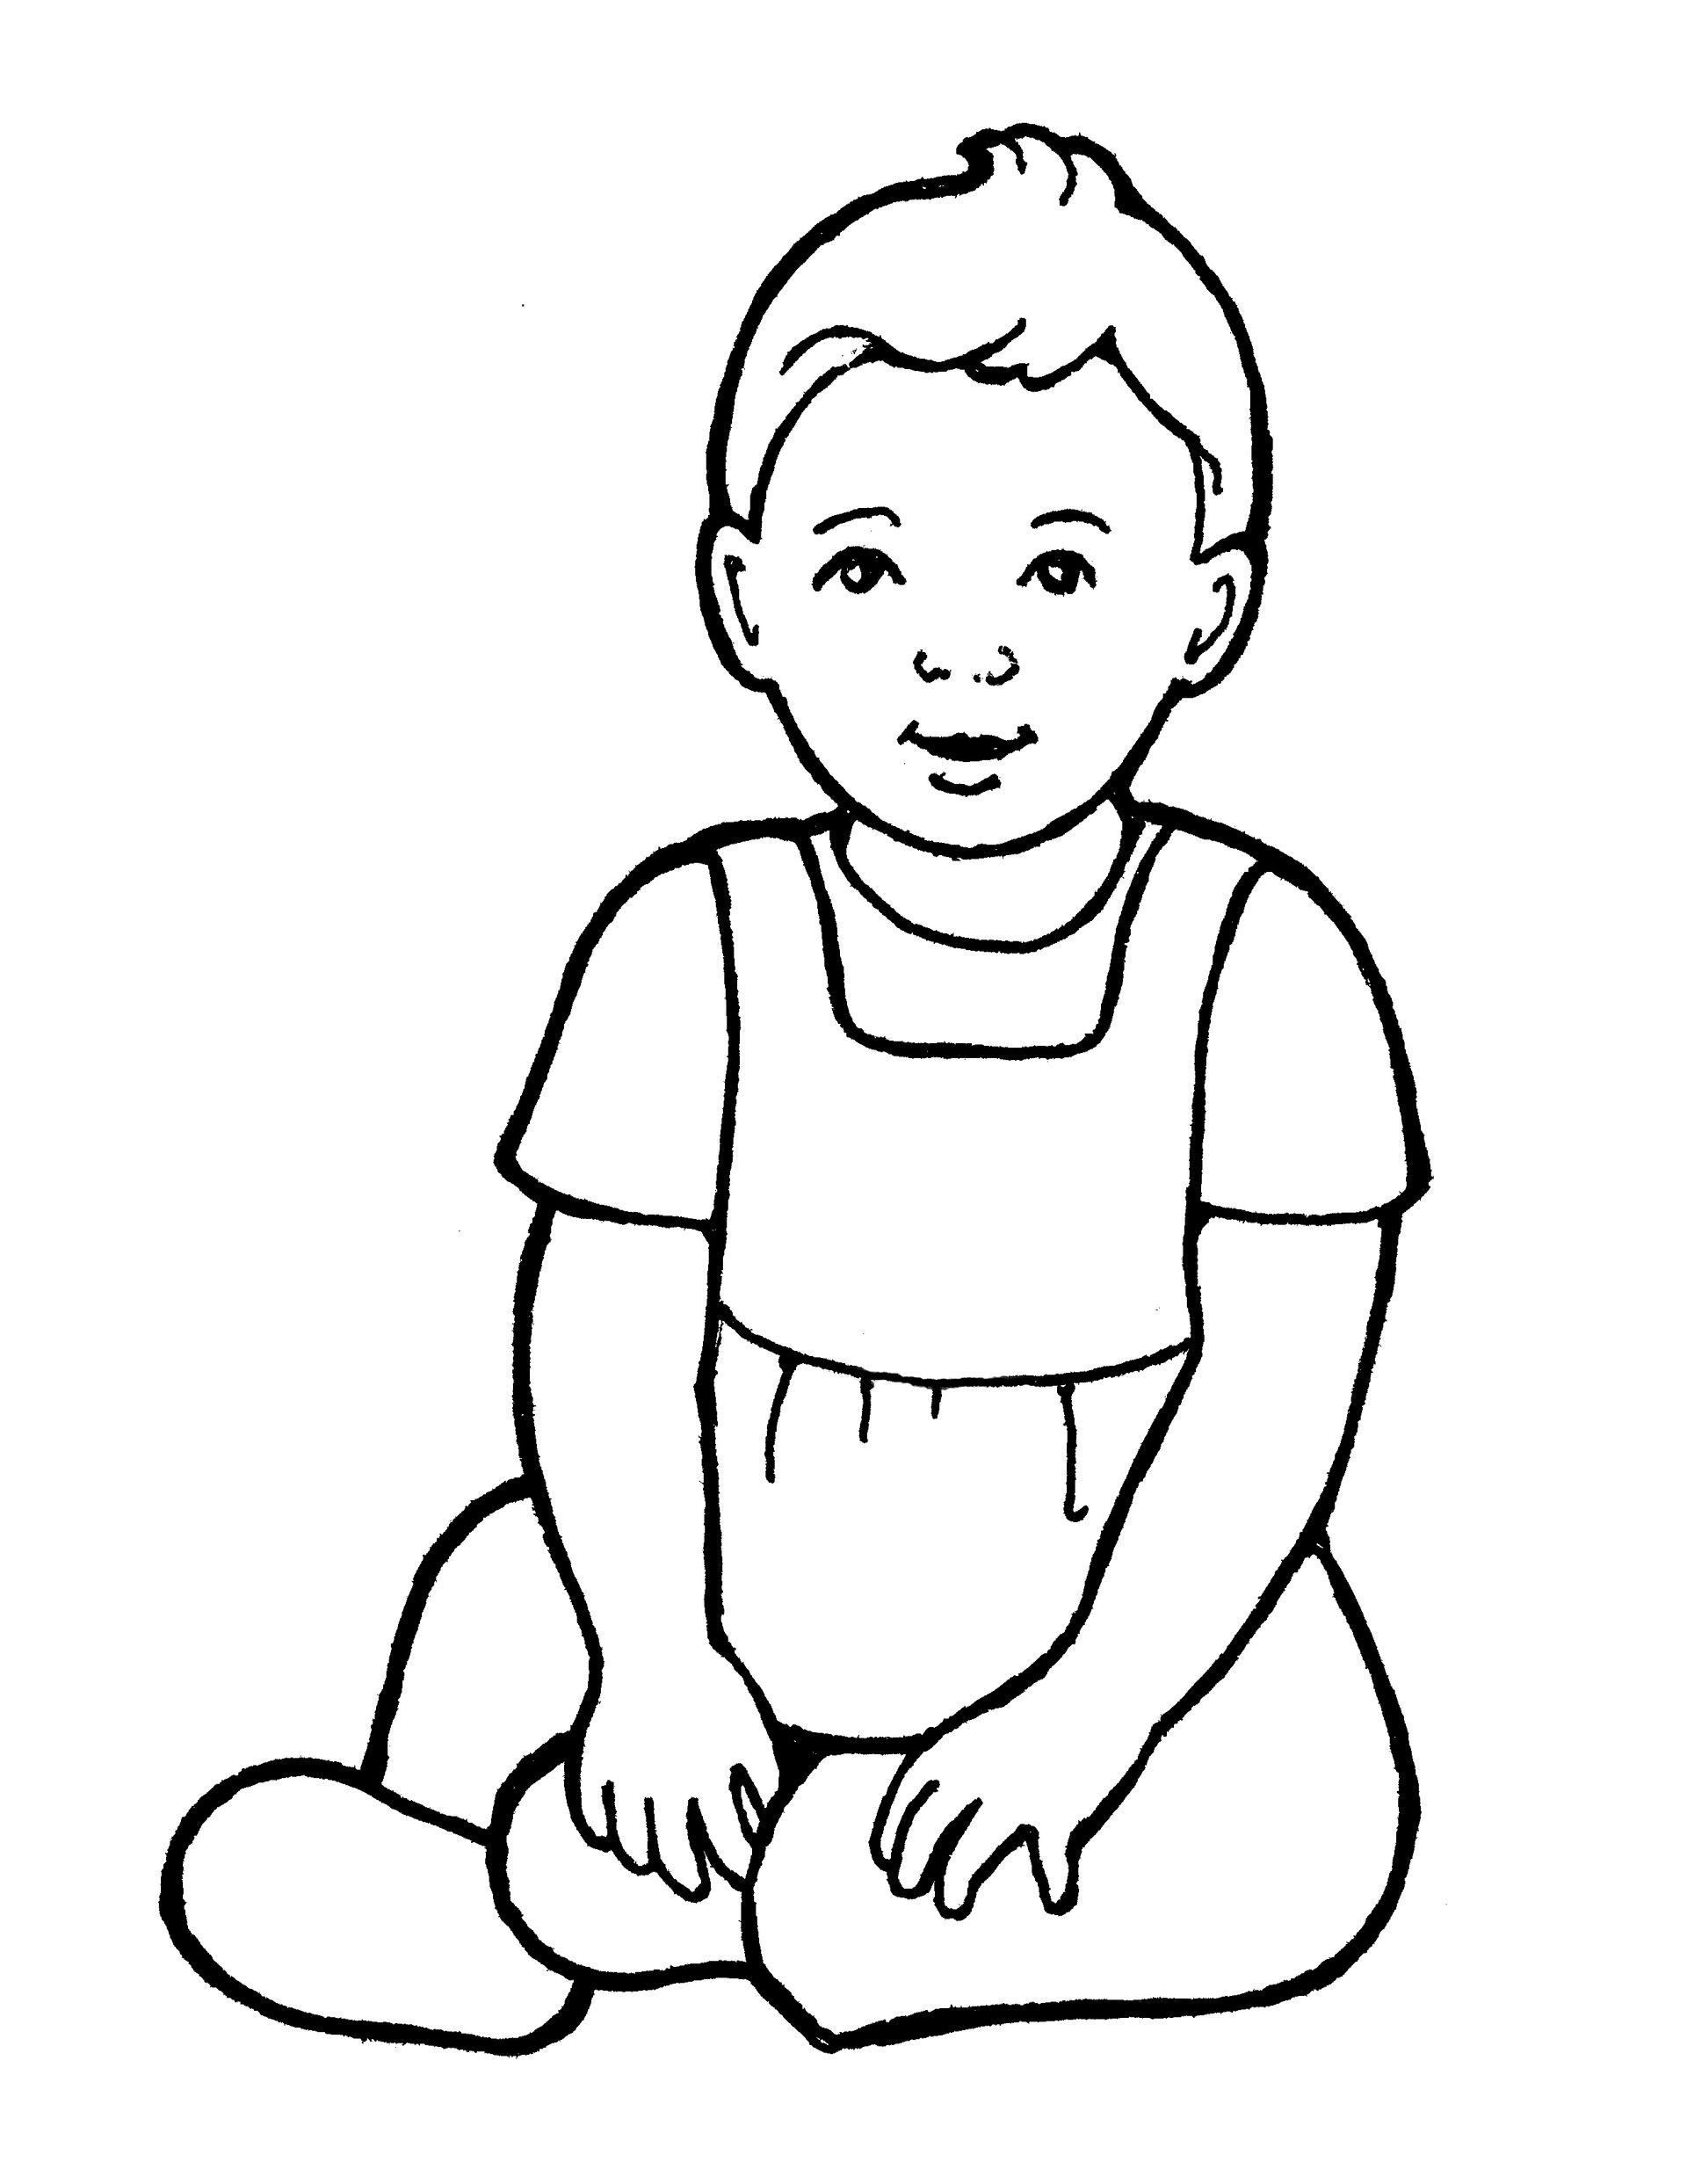 An illustration of a baby girl from the nursery manual Behold Your Little Ones (2008), page 51.